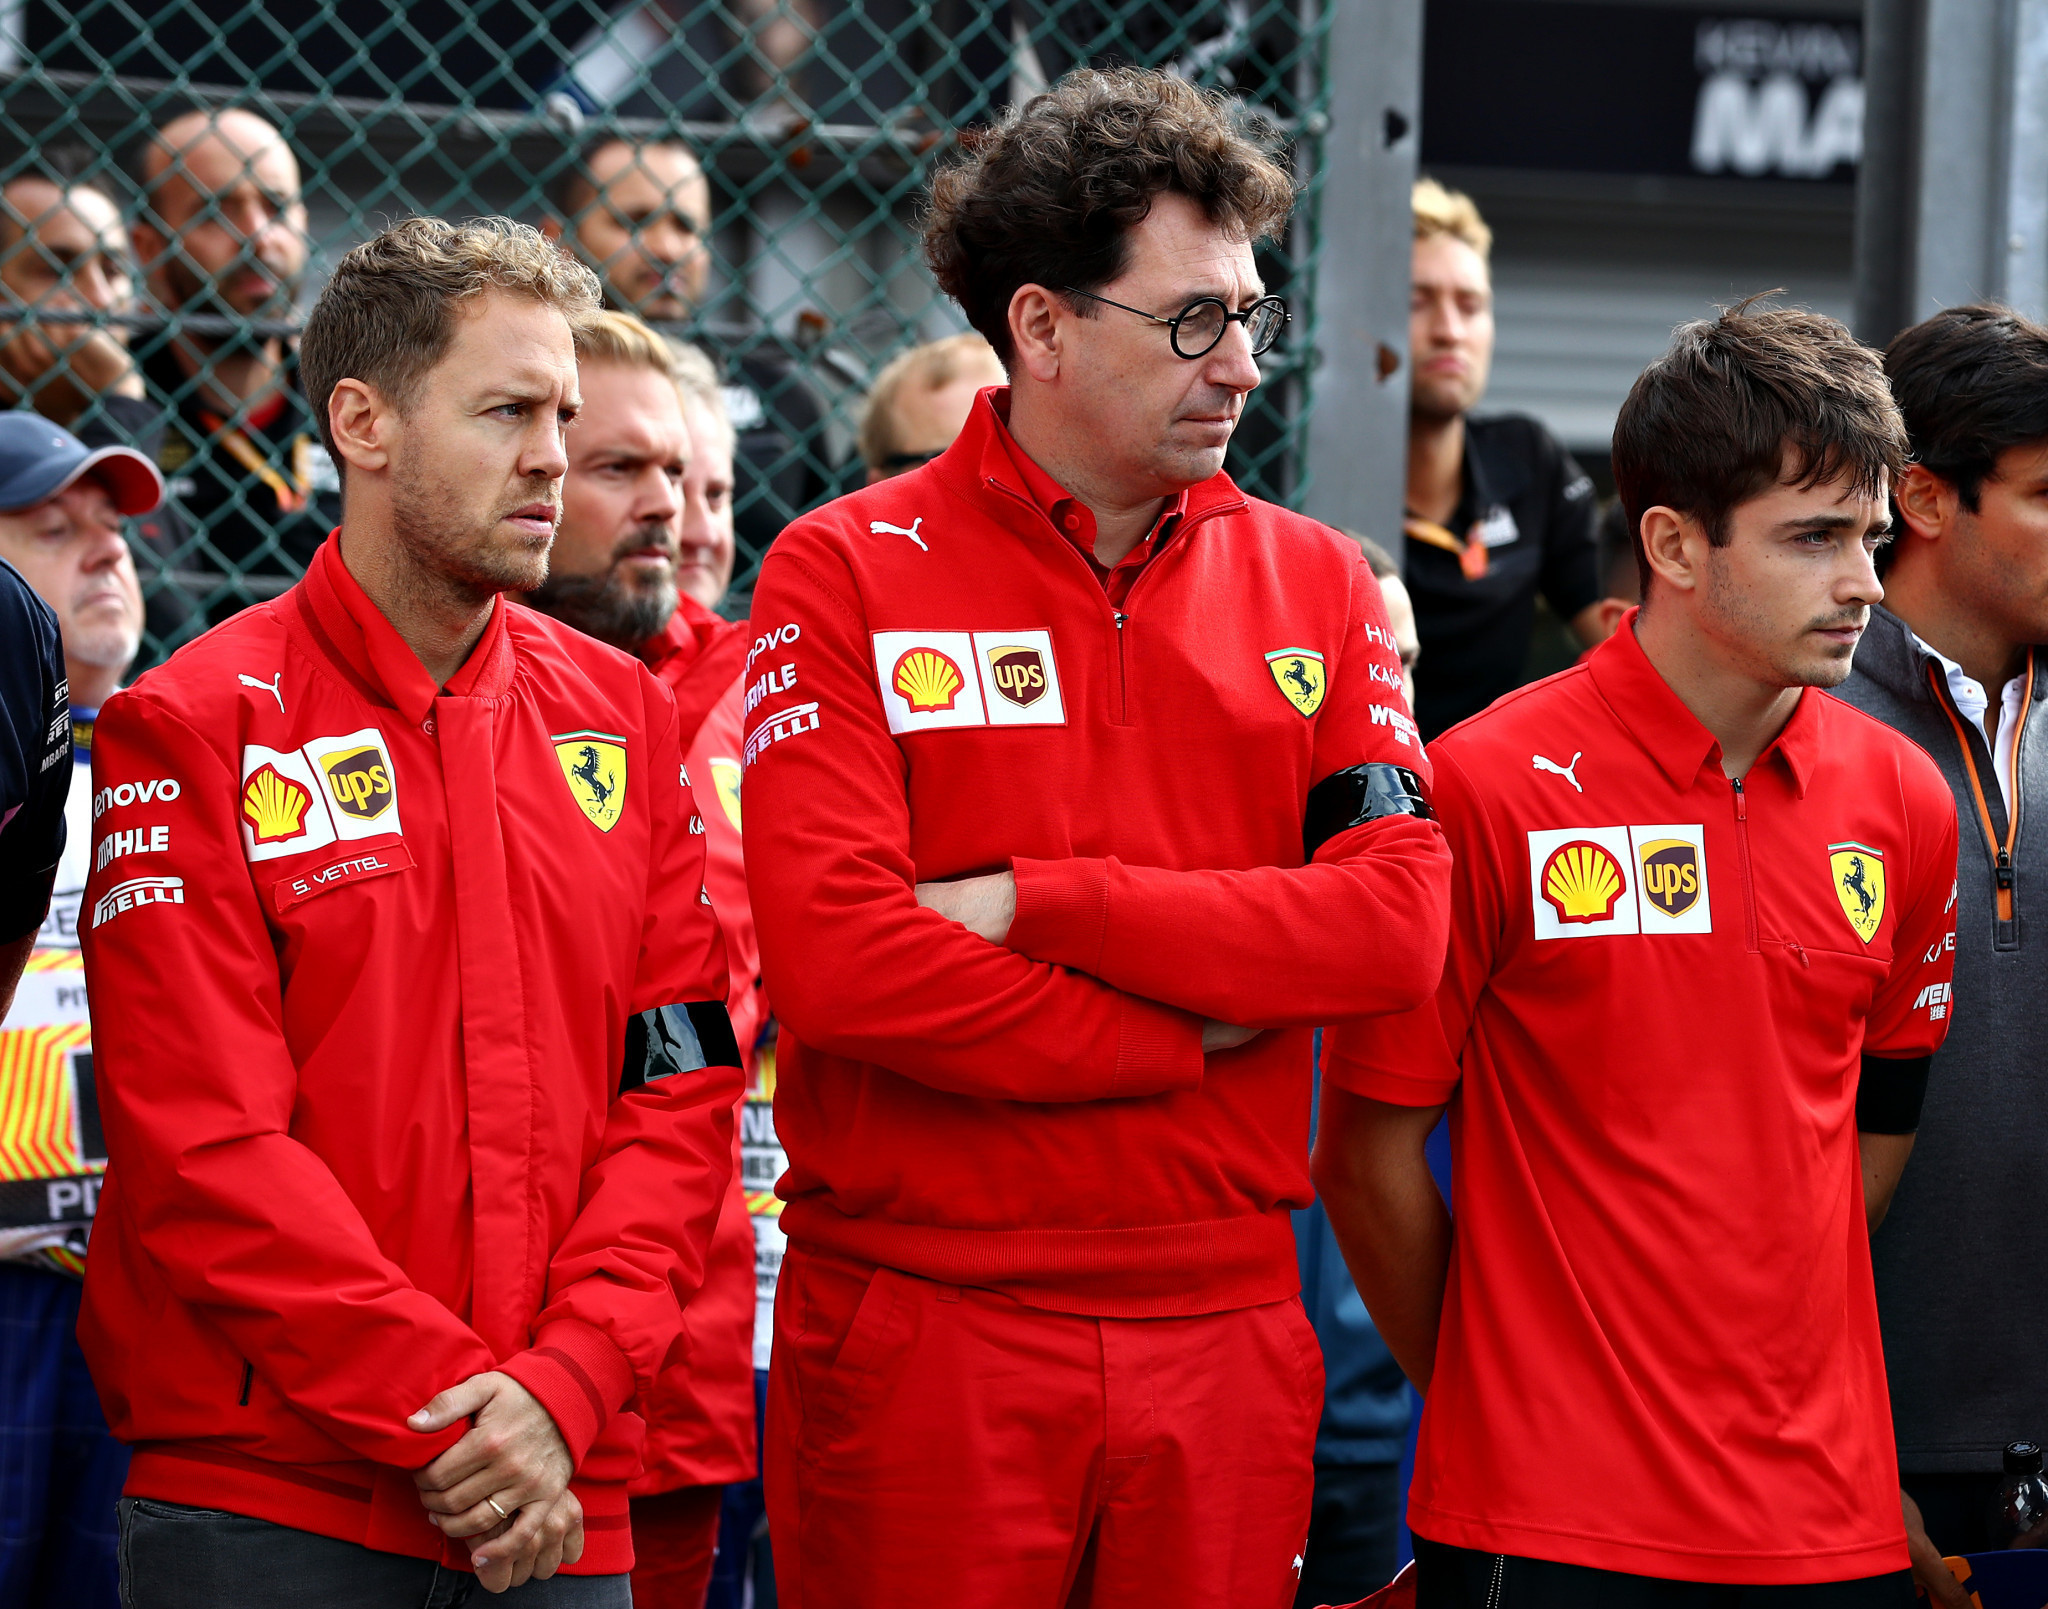 Charles Leclerc, right, pictured with teammate Sebastian Vettel, left, and team principal, Mattia Binotto, centre, has been accused of breaching social distancing rules ©Getty Images